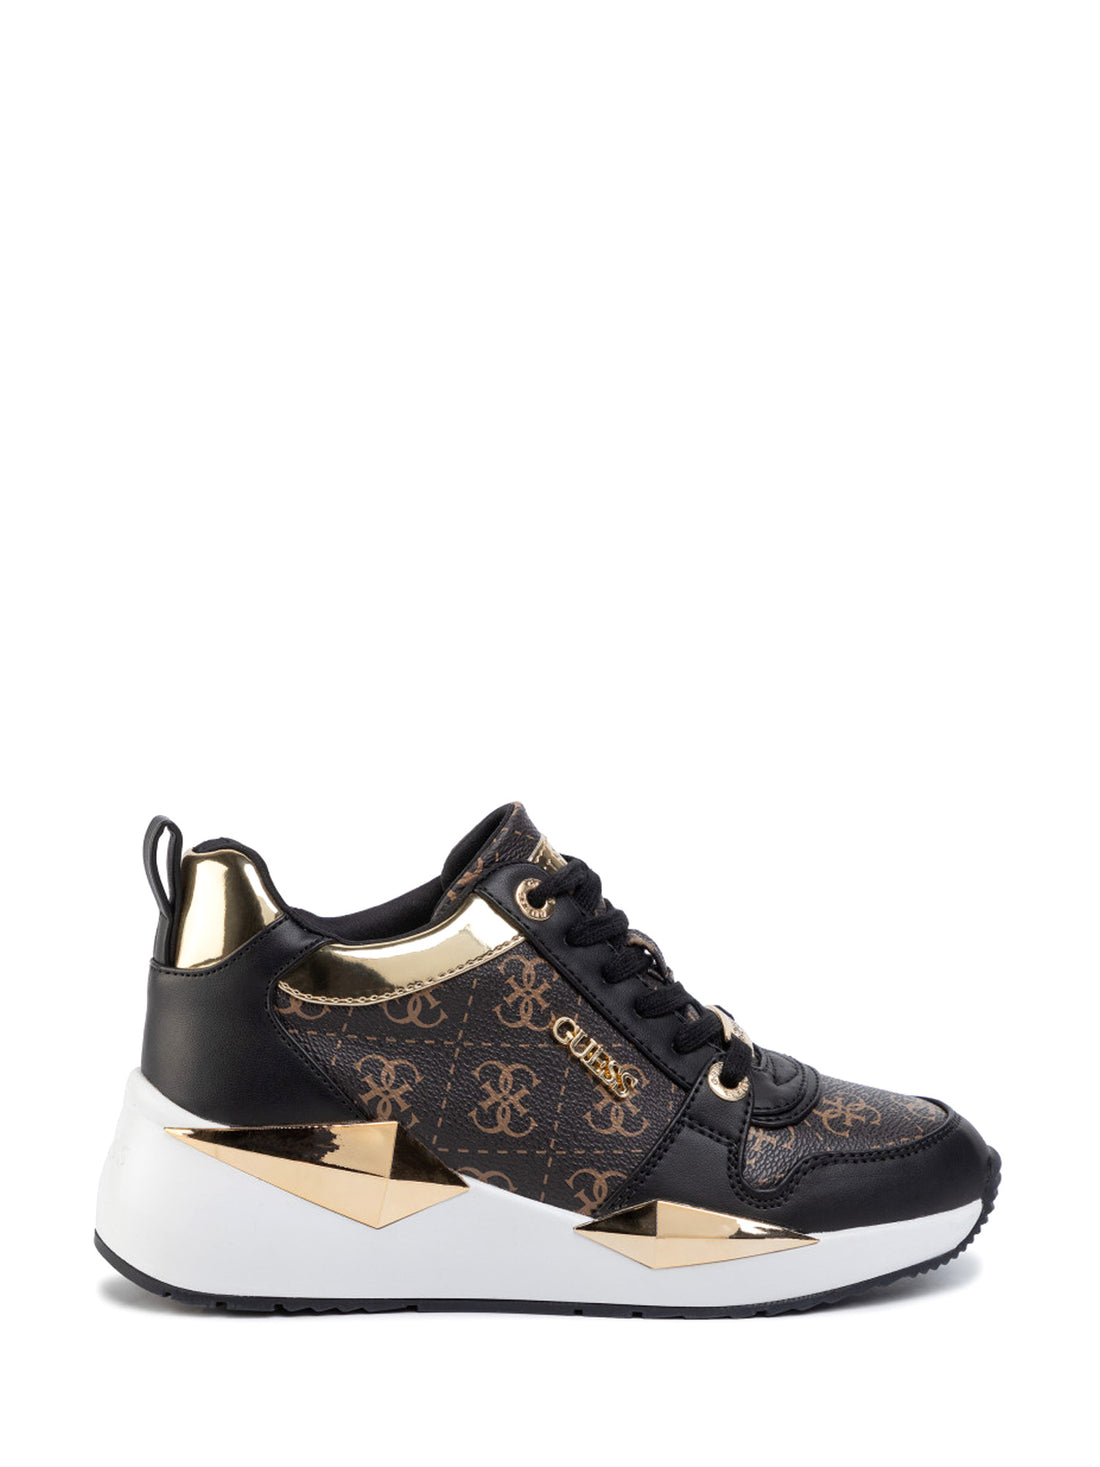 Guess Sneakers FL5TLY FAL12